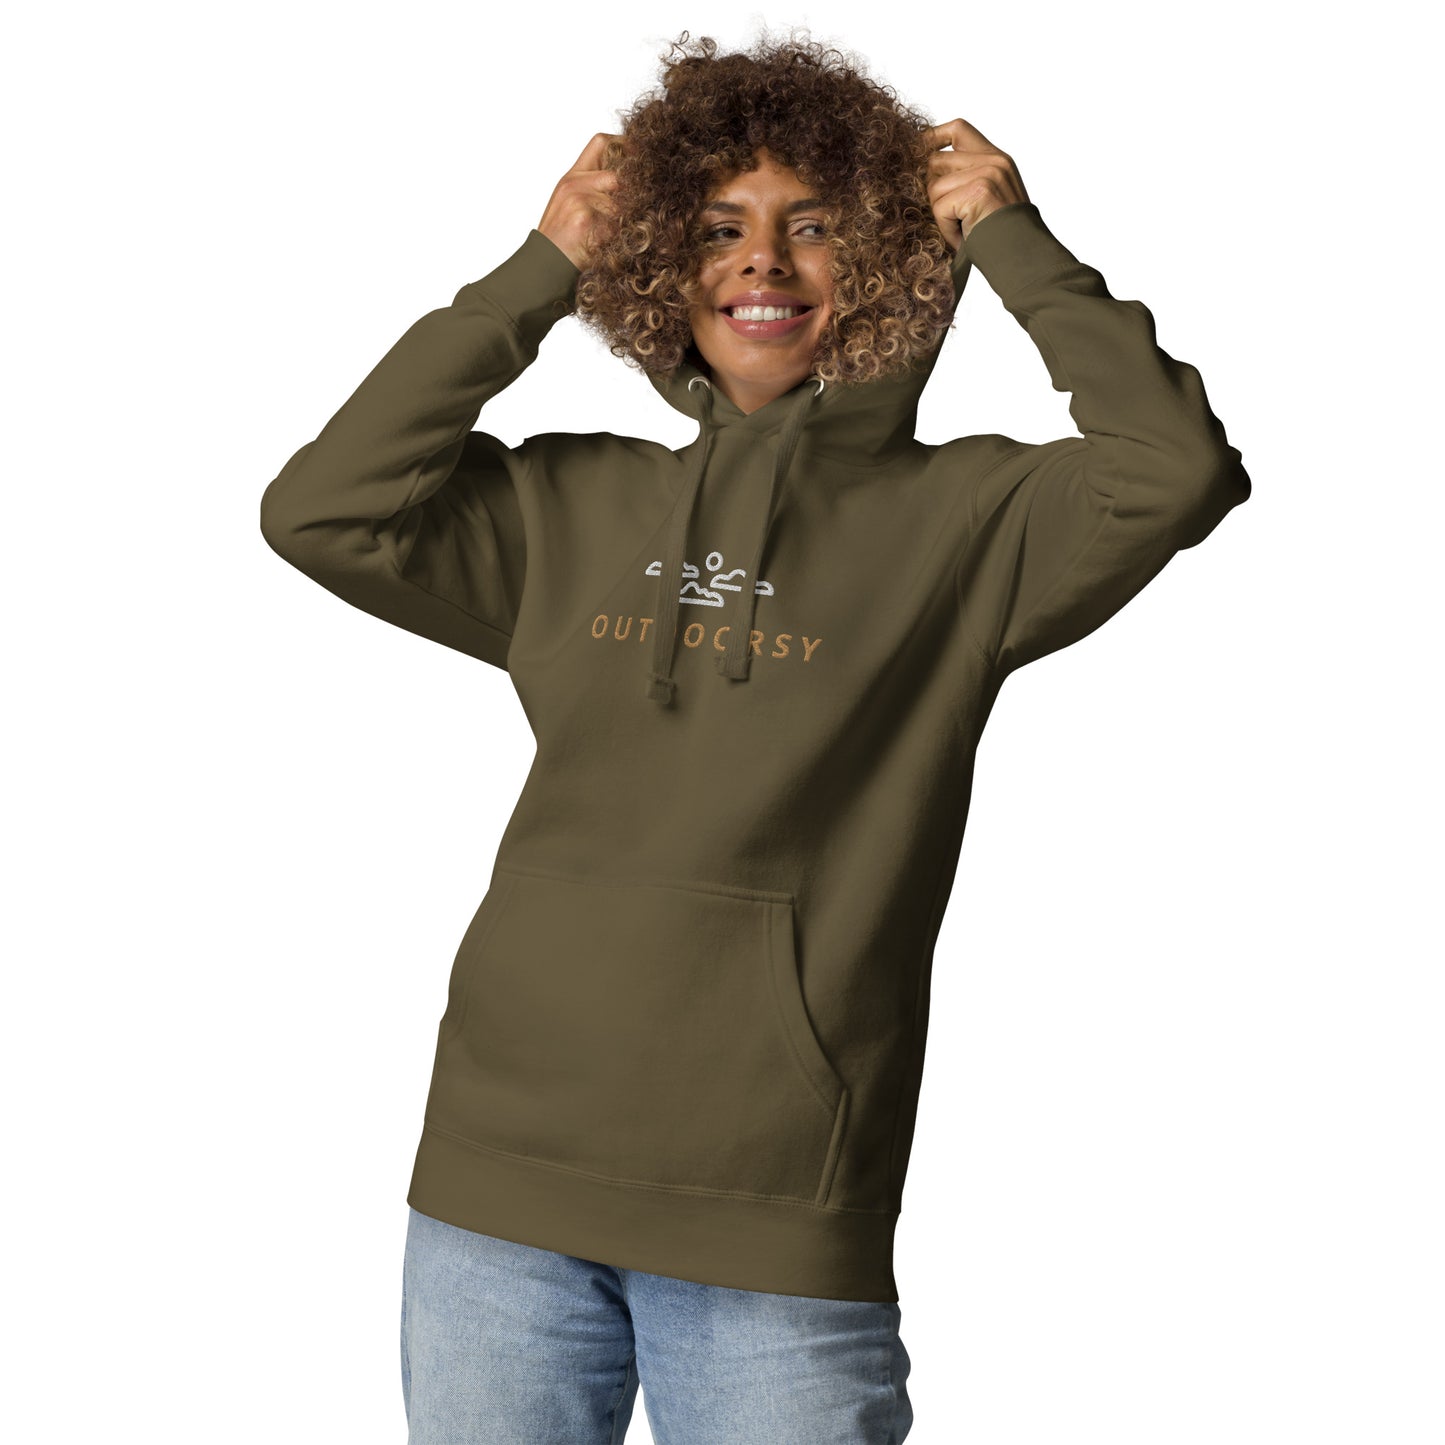 Outdoorsy Embroidered Unisex Hoodie